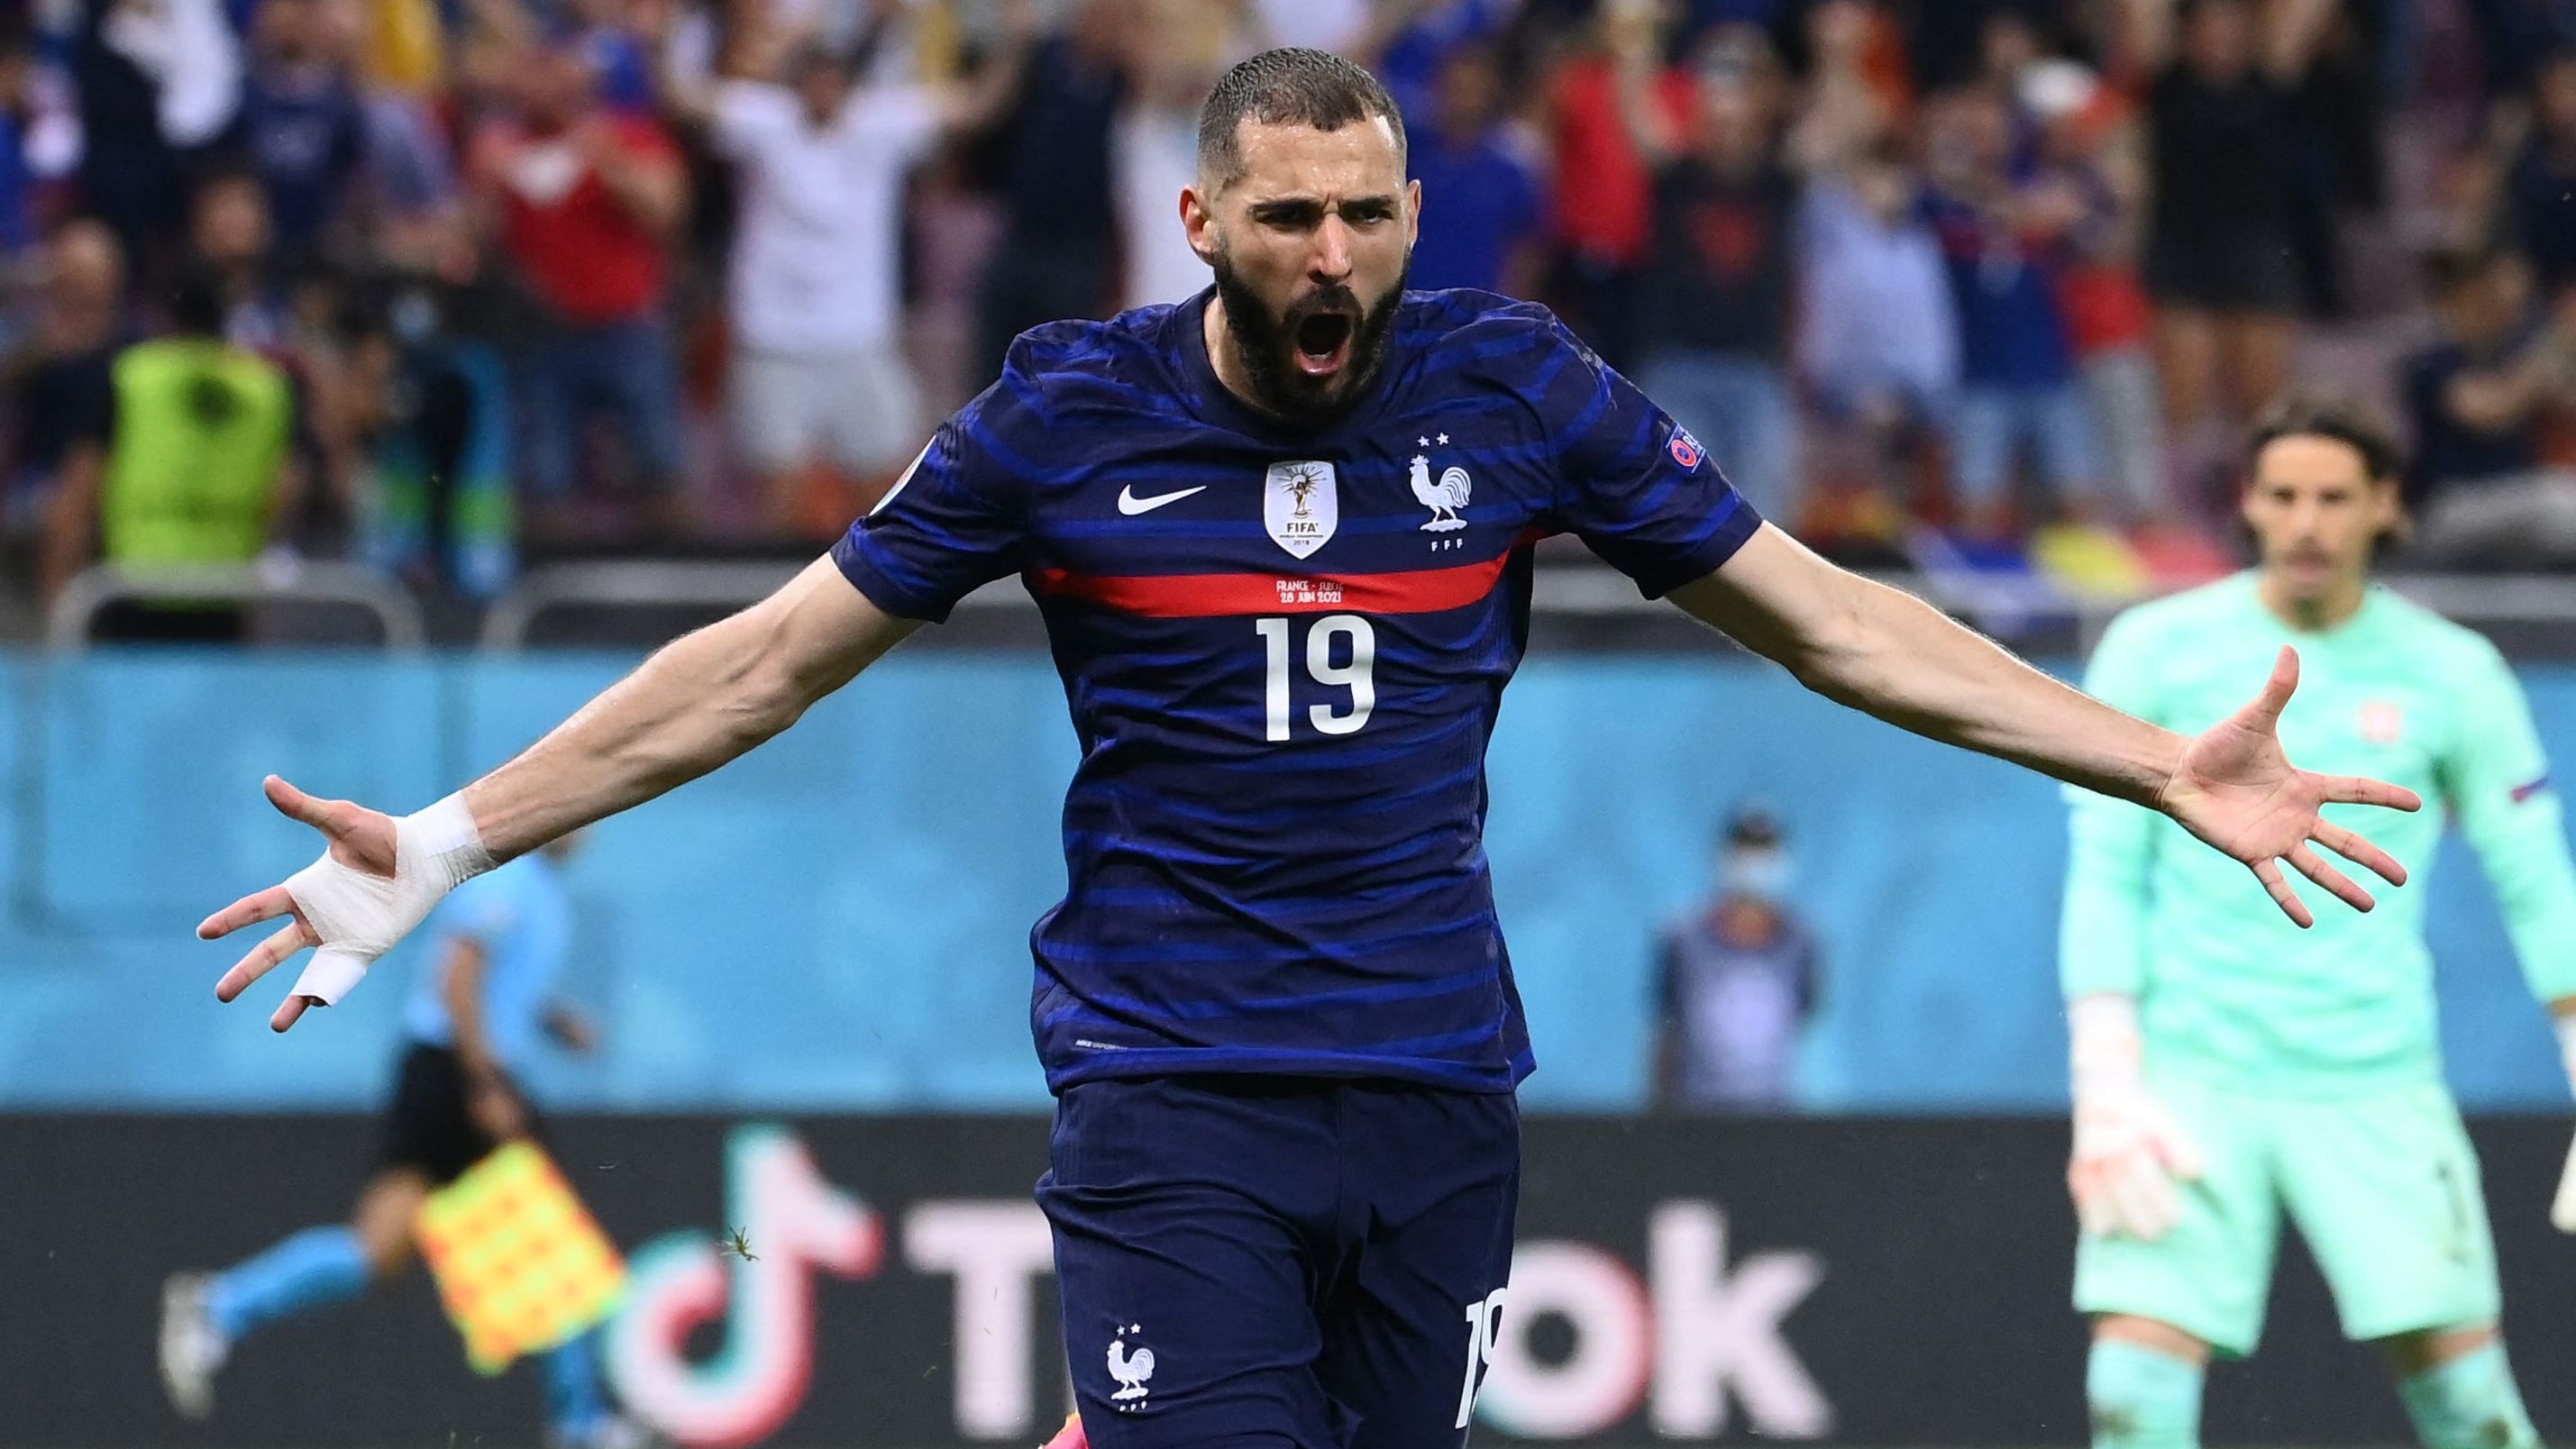 UEFA Nations League 2022/23: Karim Benzema and France FACES a Resilient Opposition from Cristian Eriksen's Denmark, Follow France vs Denmark LIVE Streaming: Check Team News, Predictions